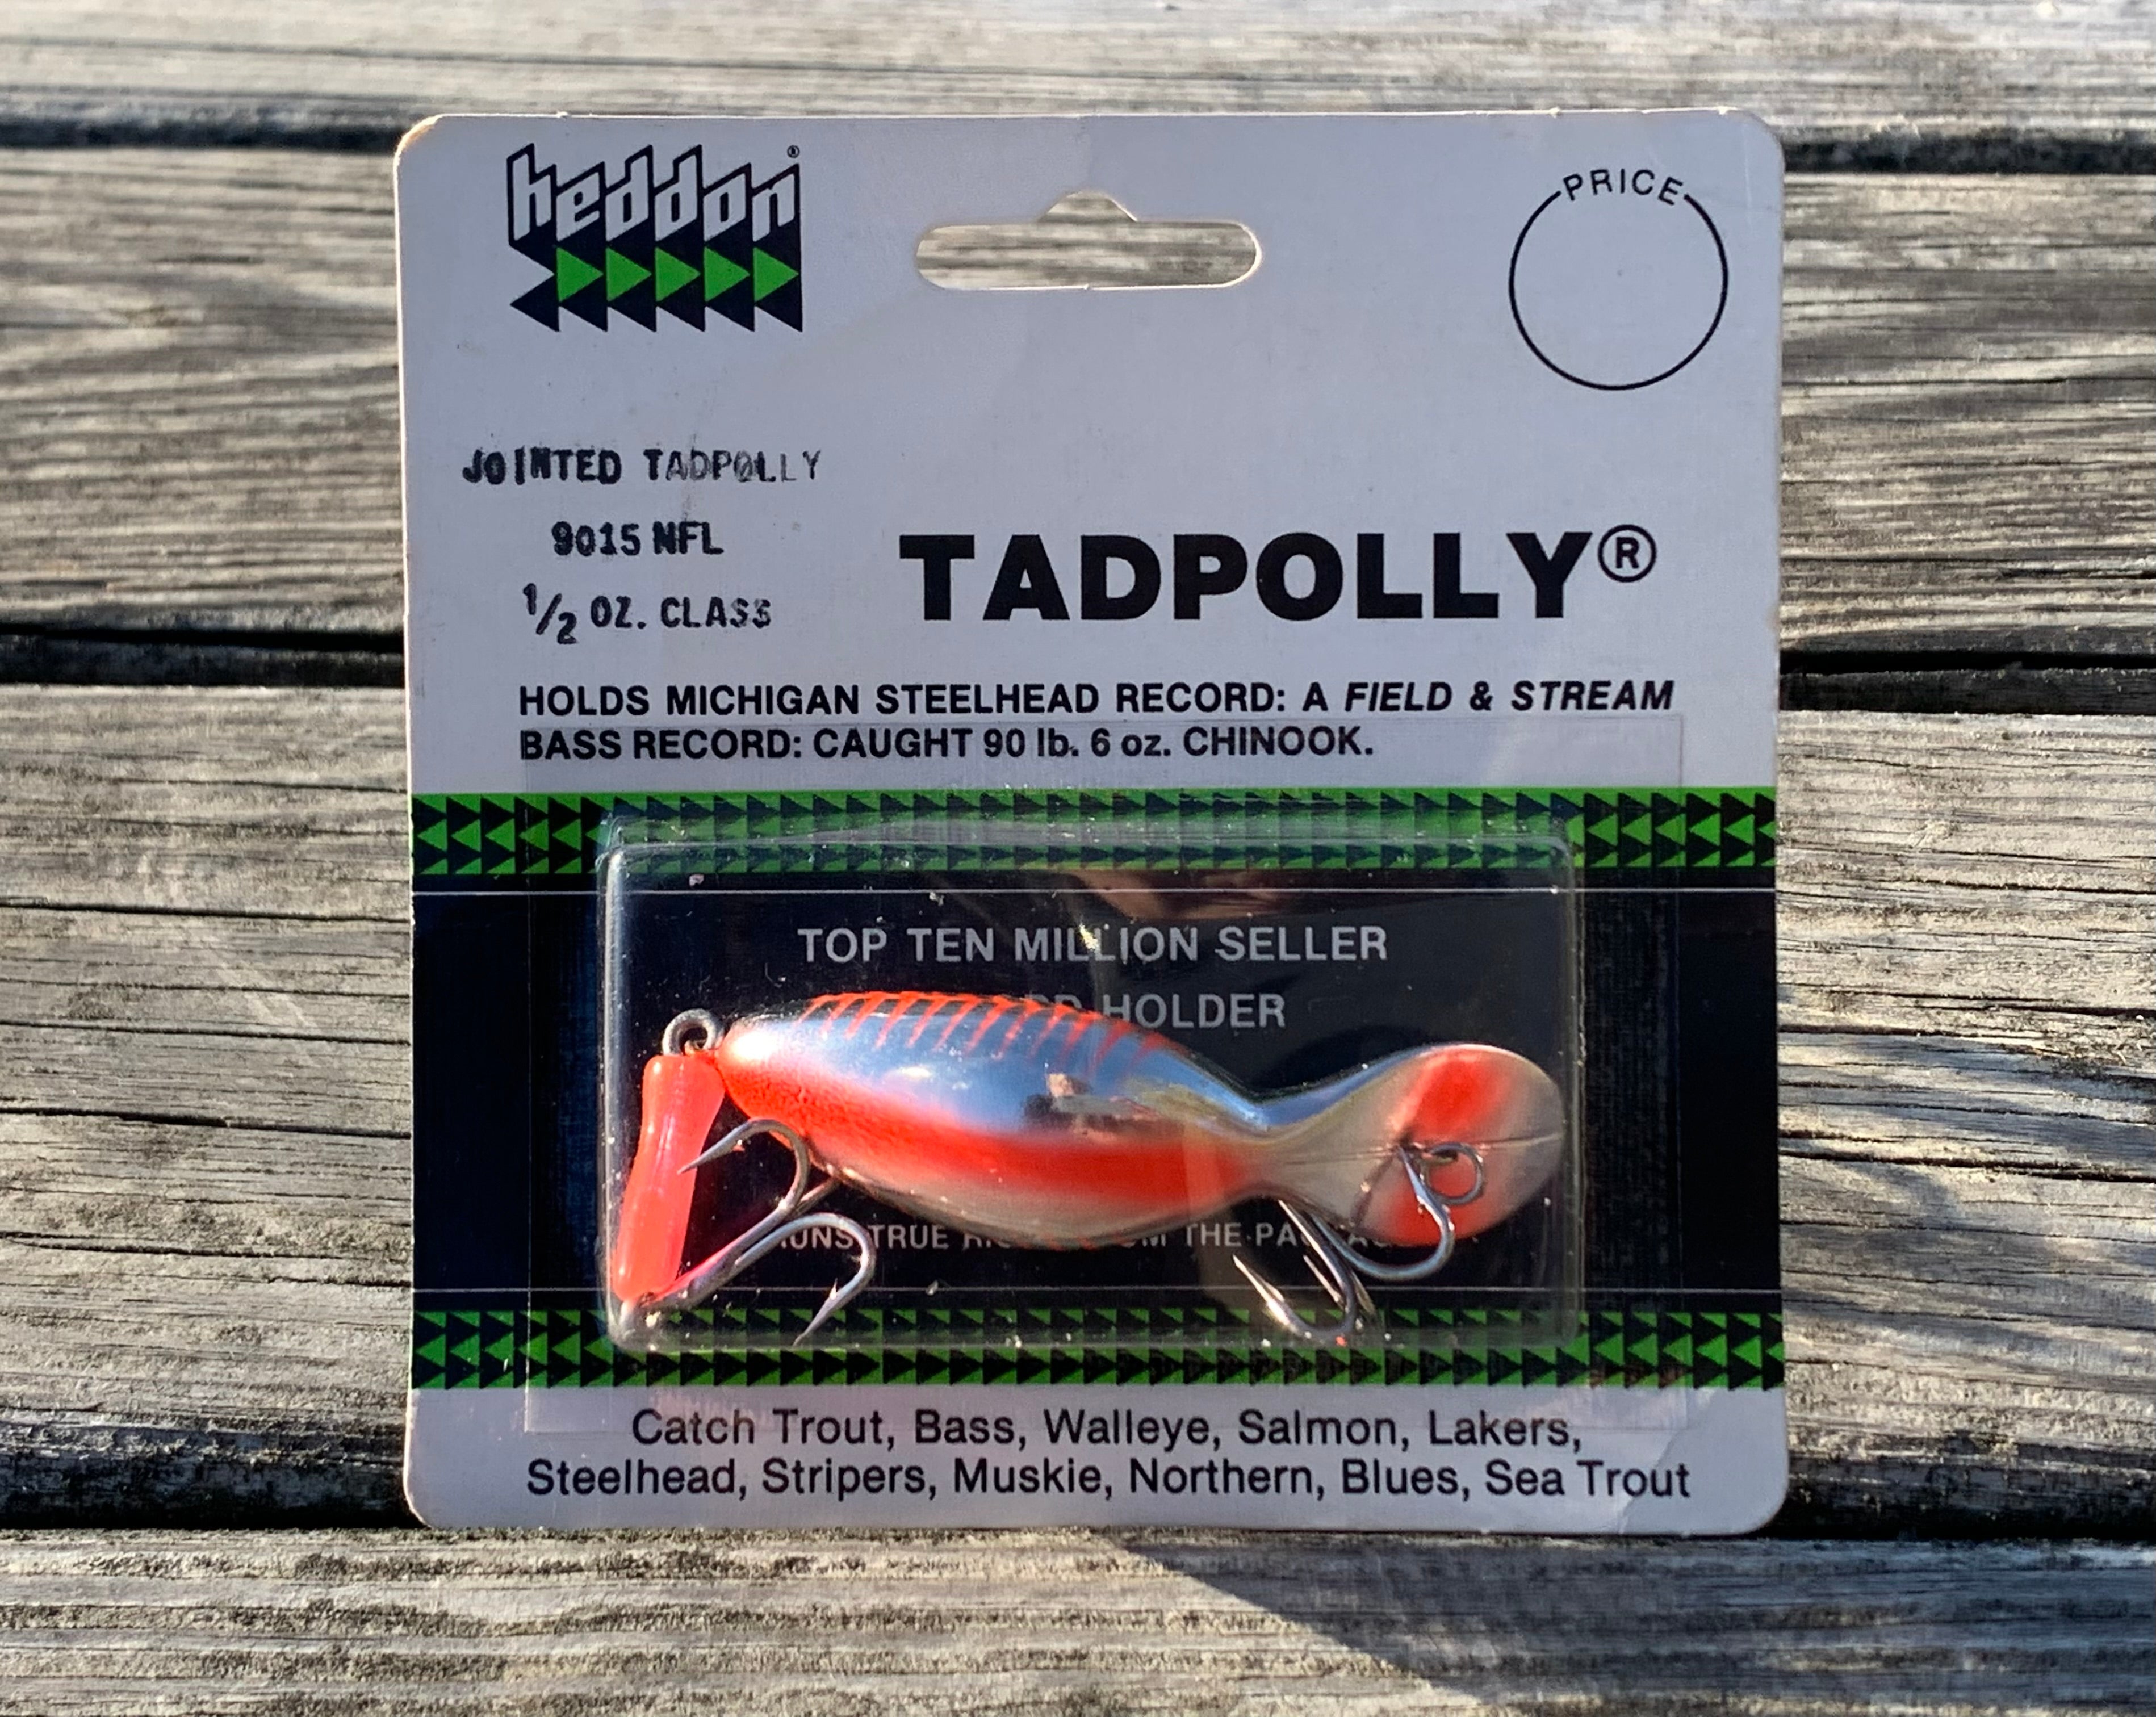 Three Heddon Tadpolly lures as described below: - AAA Auction and Realty